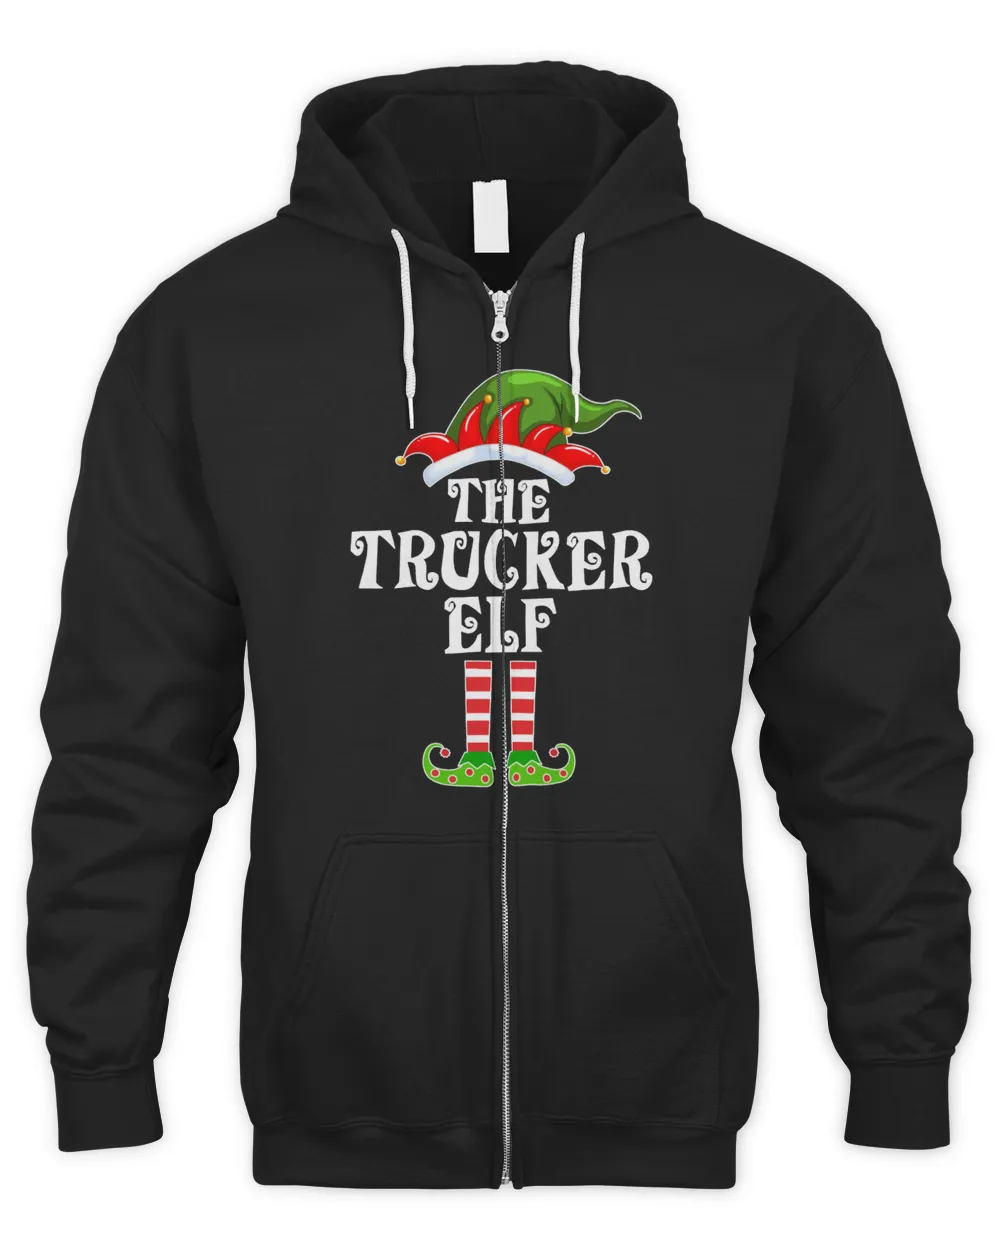 Trucker Elf Matching Family Group Christmas Party Pajama